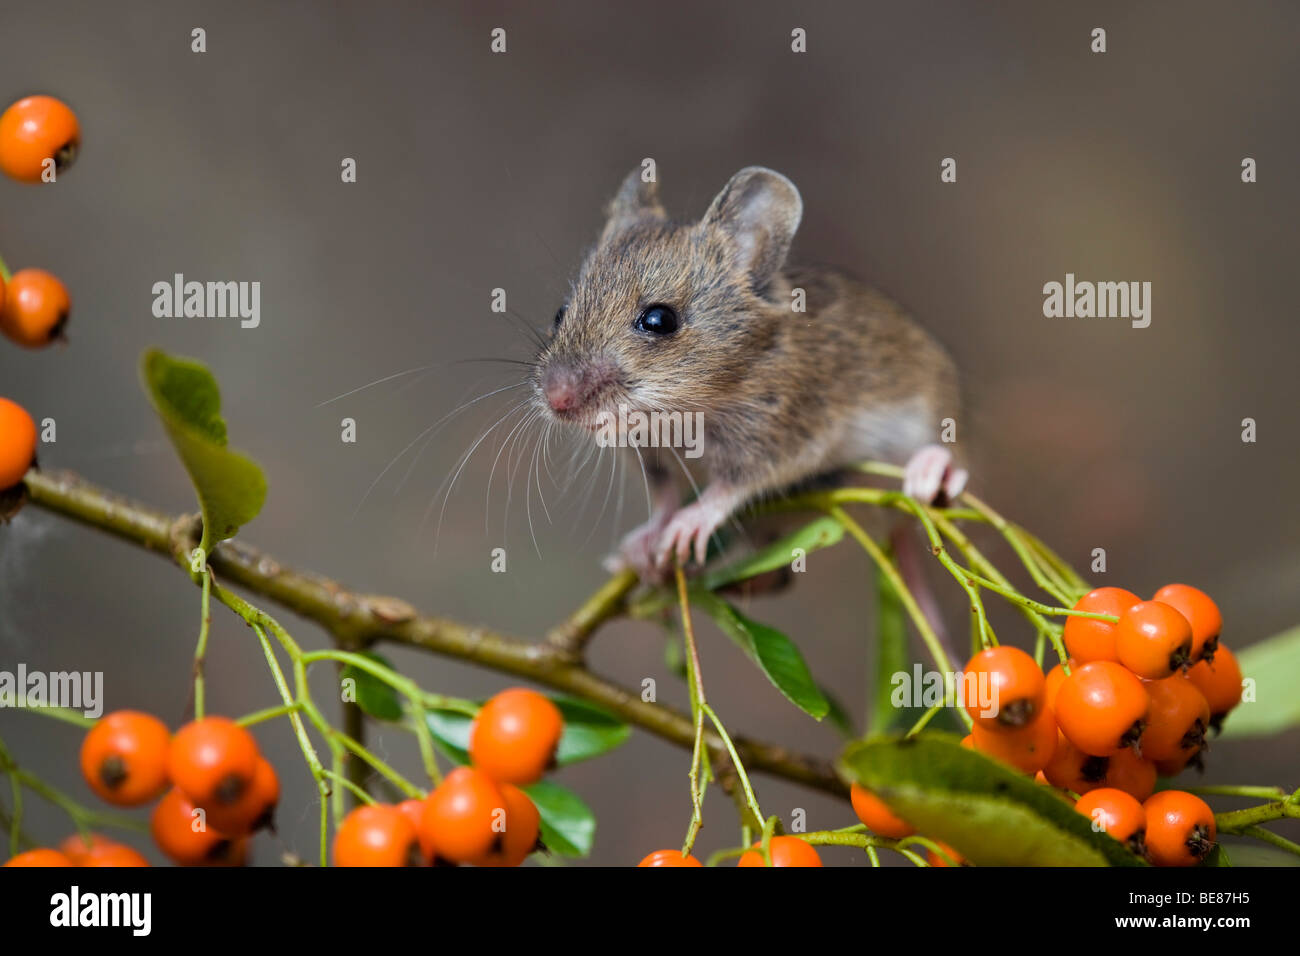 wood mouse; Apodemus sylvaticus; with pyracantha berries Stock Photo